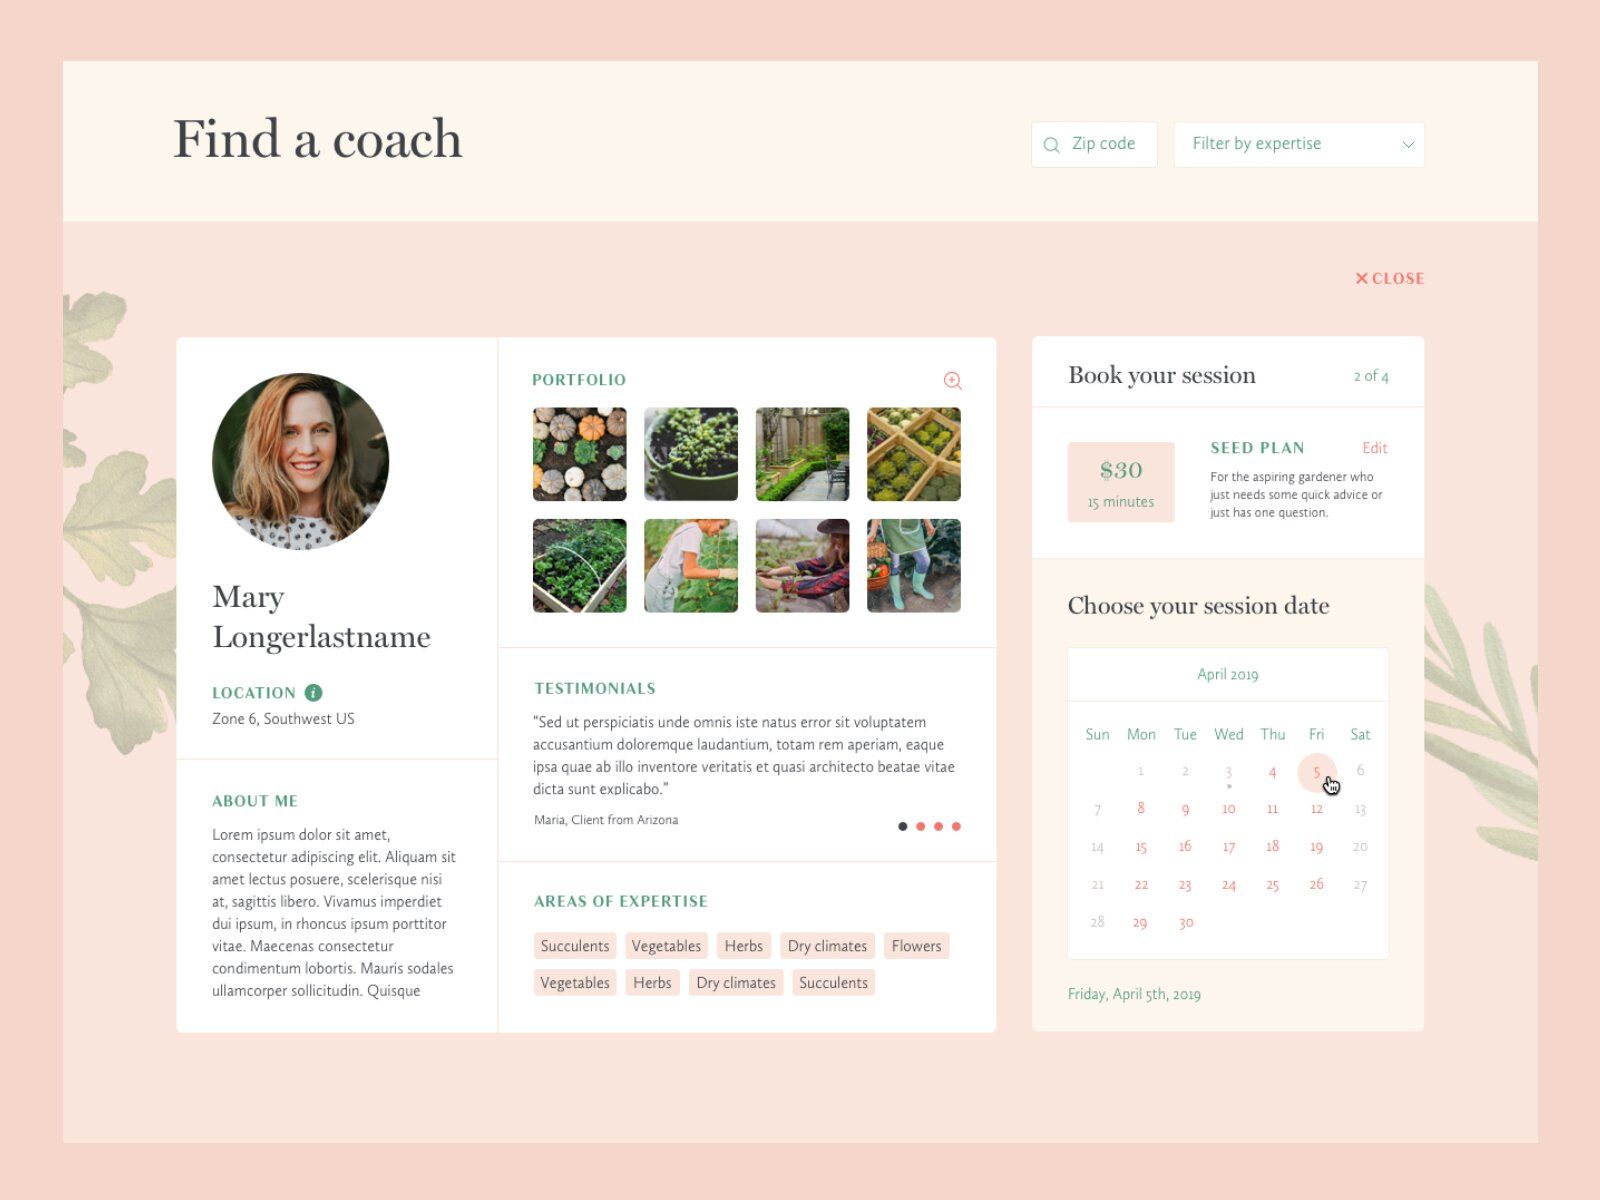 The personal contact page on a life coach website (*image by [Meagan Fisher Couldwell](https://dribbble.com/owltastic){ rel="nofollow" target="_blank" .default-md}*)